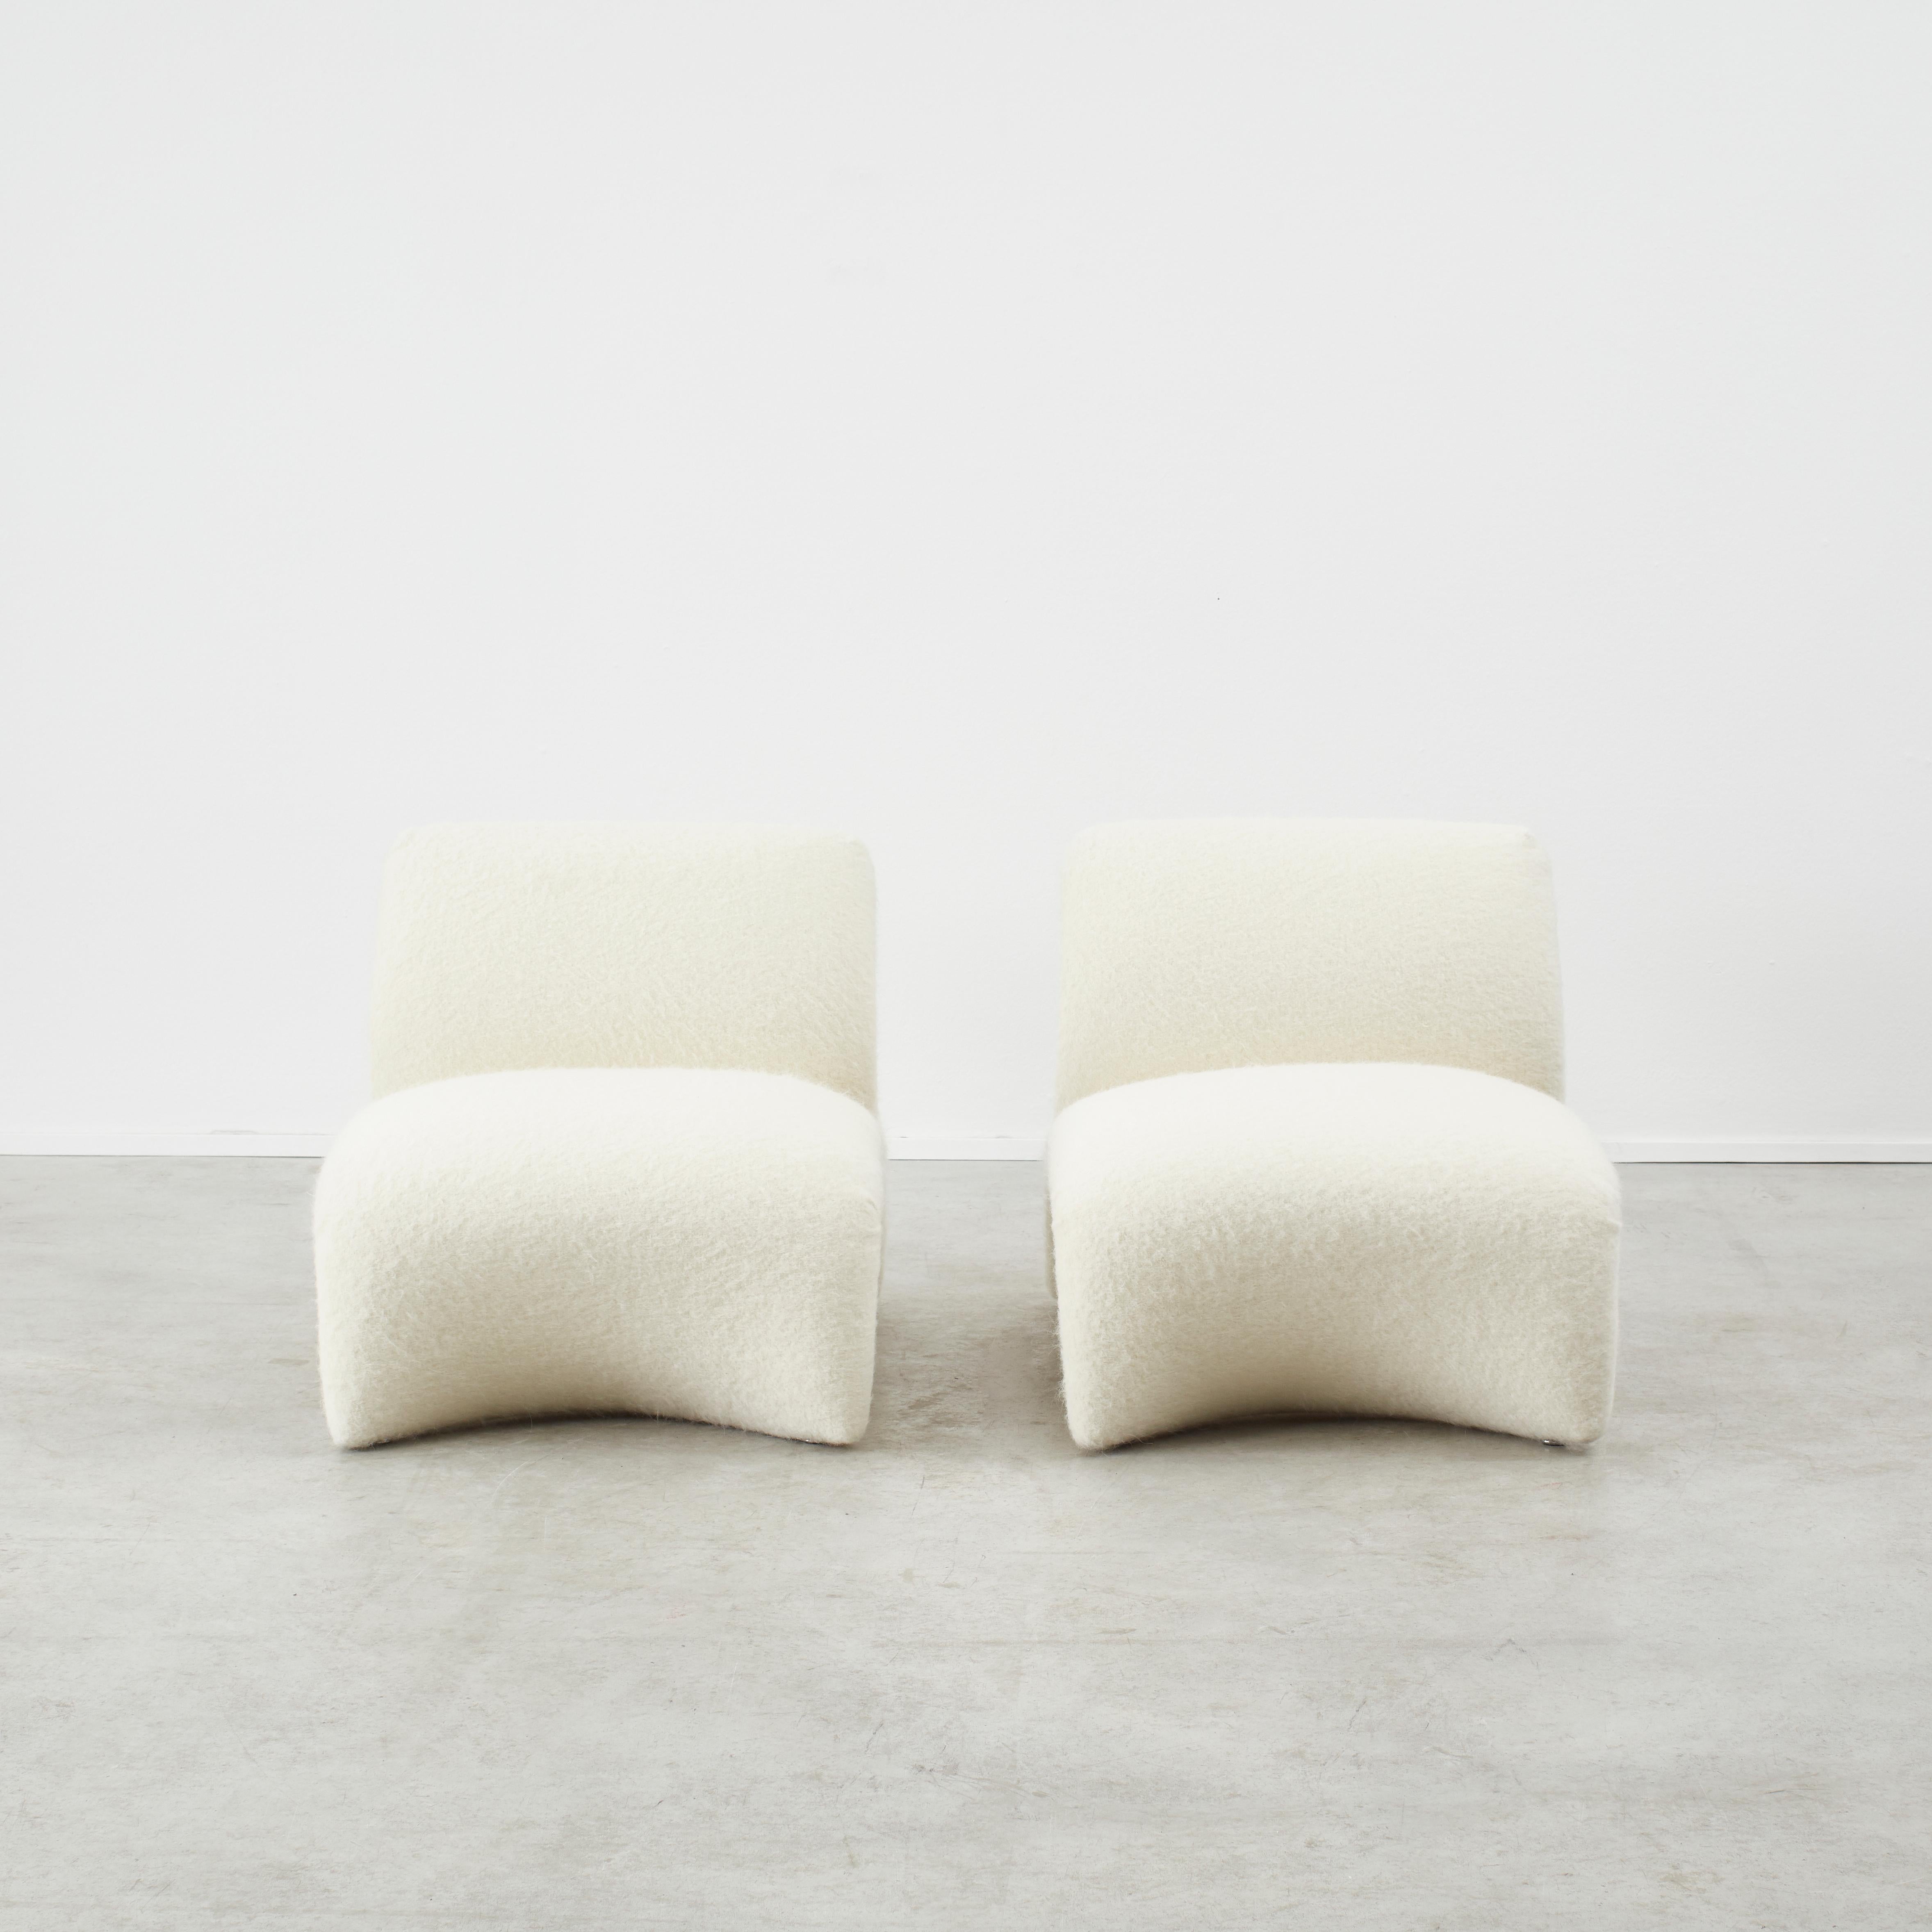 French Pair of Kwok Hoï Chan Kaïdo chair for Steiner, France, 1968